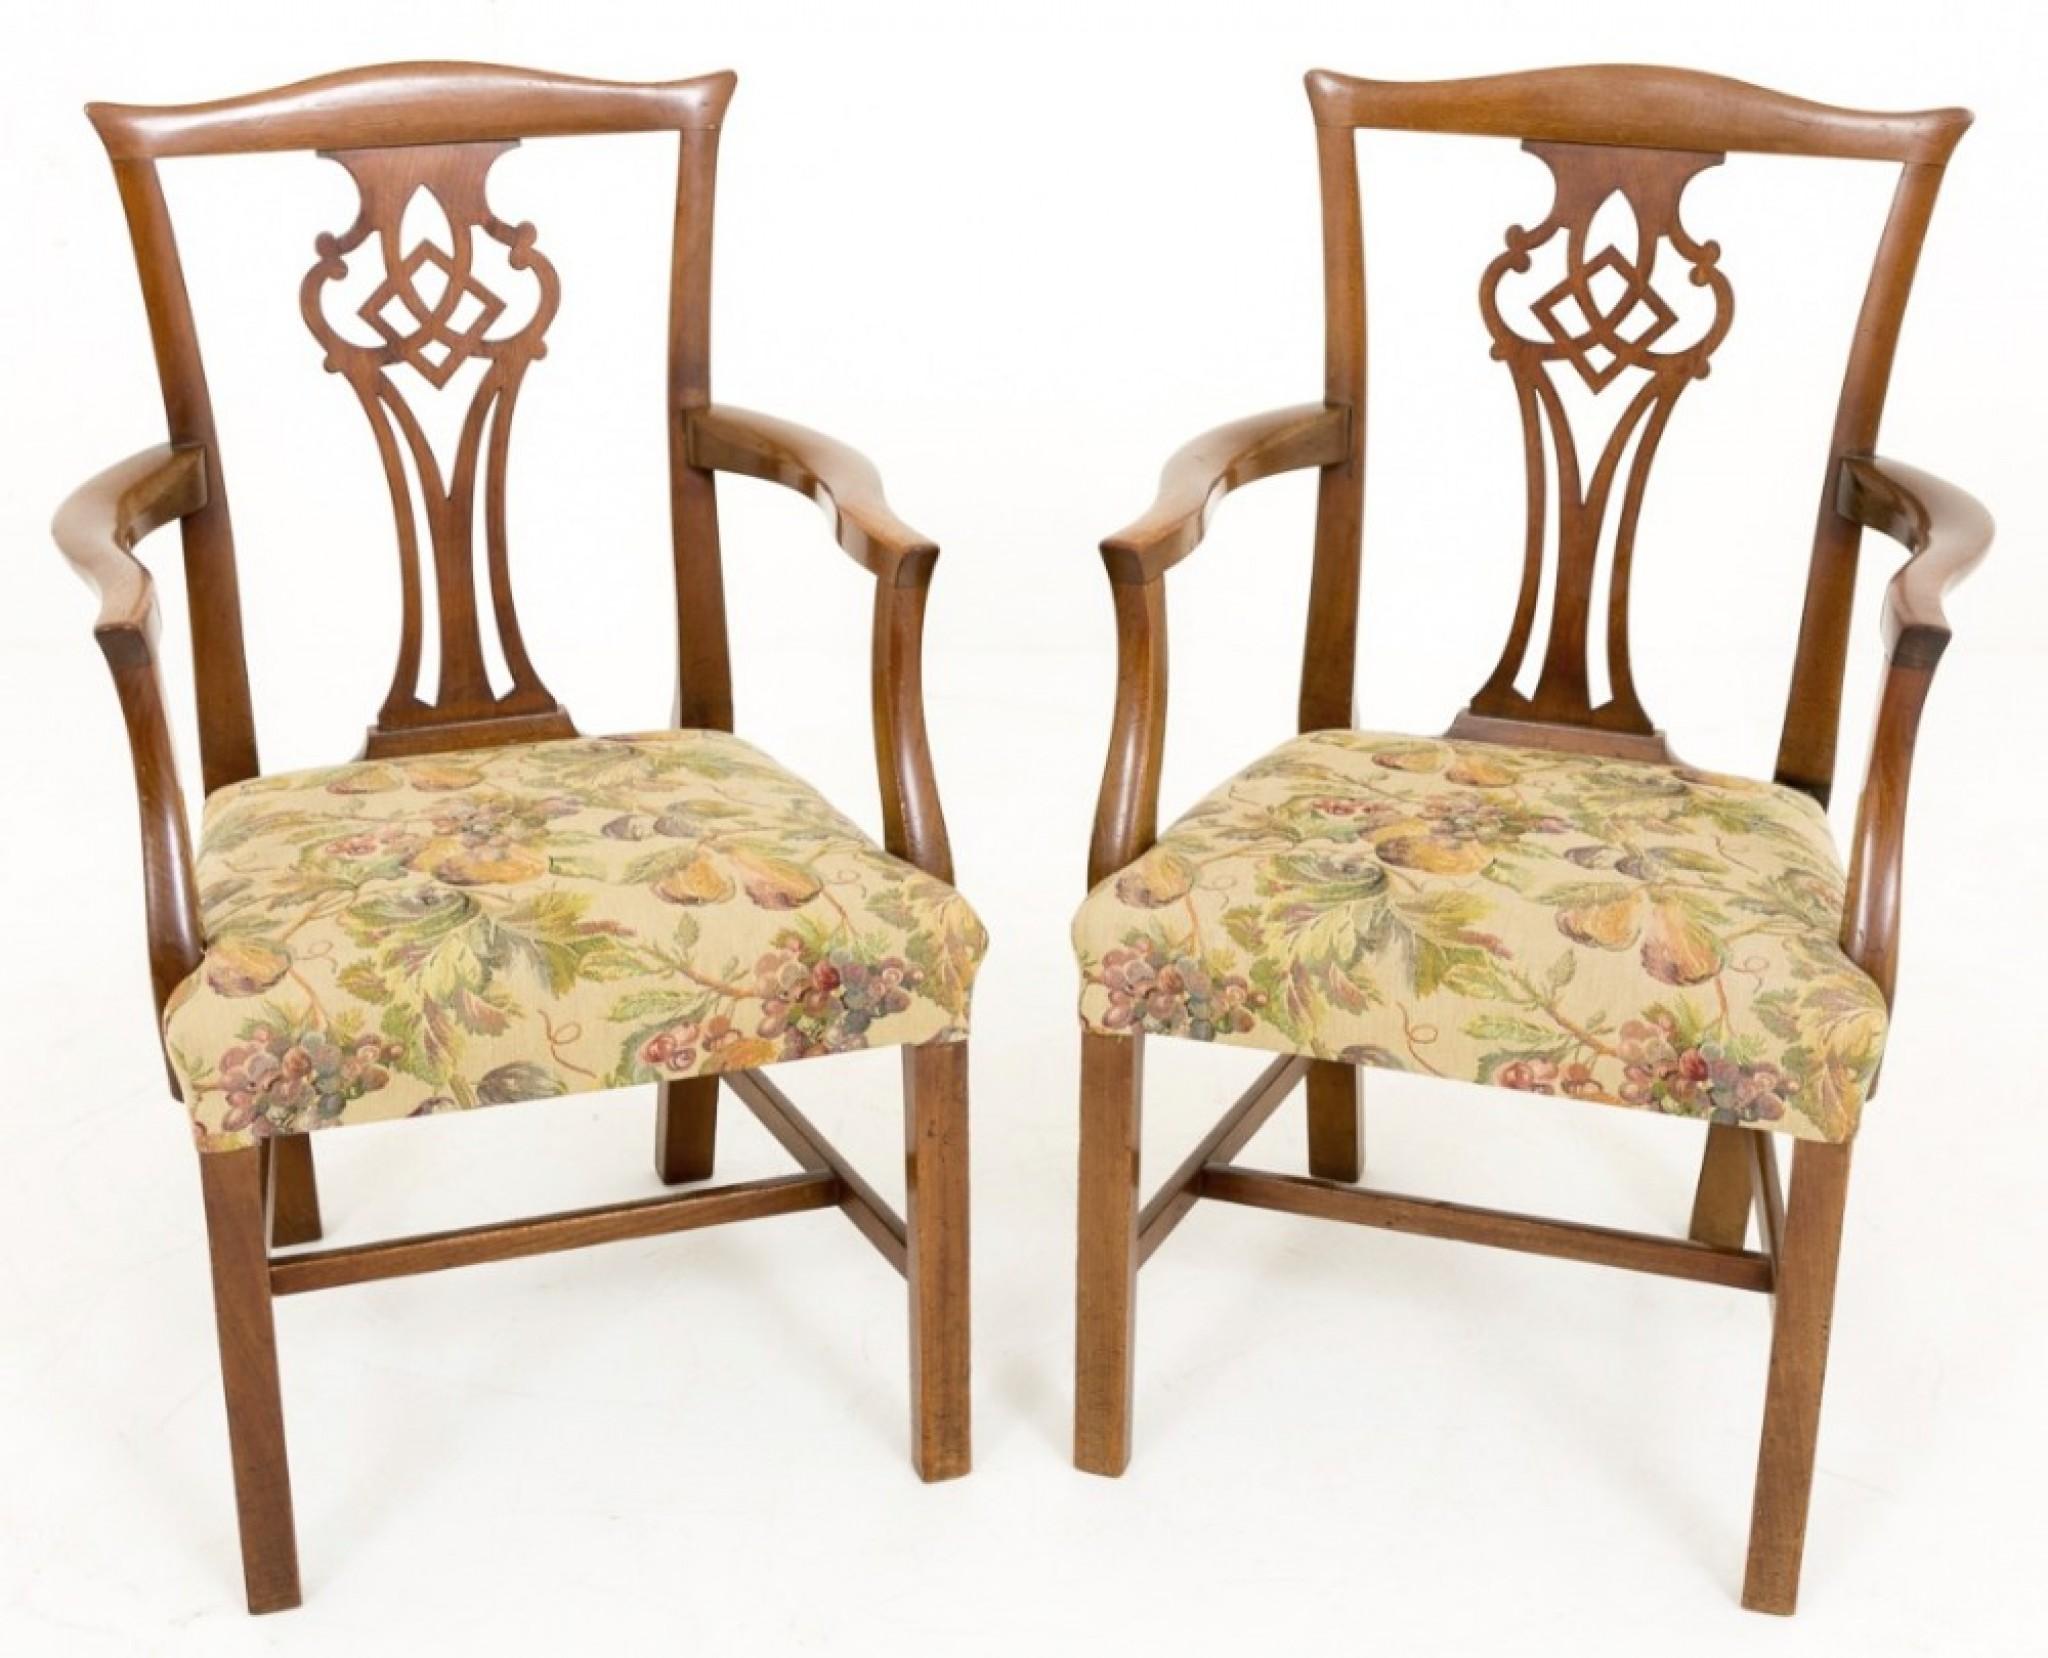 Pair of Mahogany Chippendale Style Armchairs.
Raised upon square legs with an 